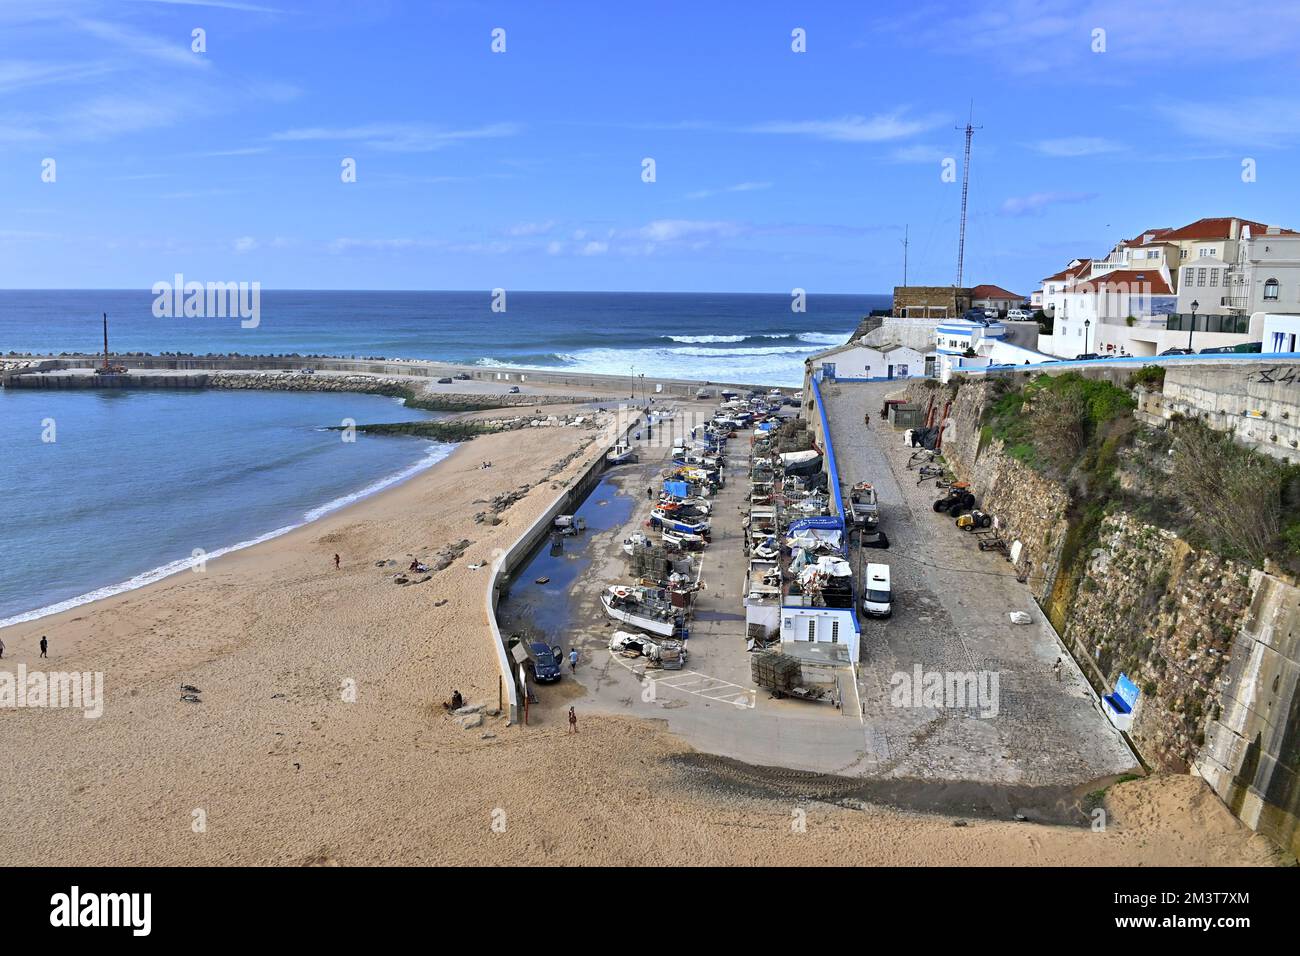 Landscape of the village of Ericeira with its traditional houses and fishing port on Pescadores beach, Portugal Stock Photo